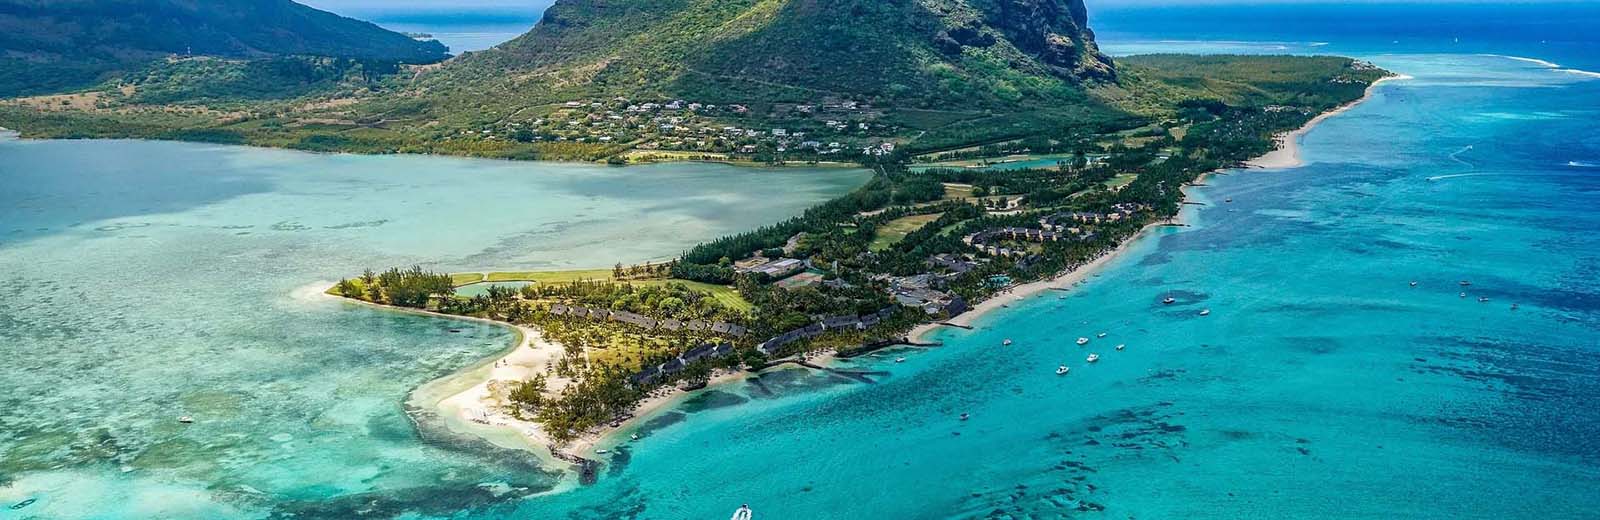 best honeymoon packages for mauritius